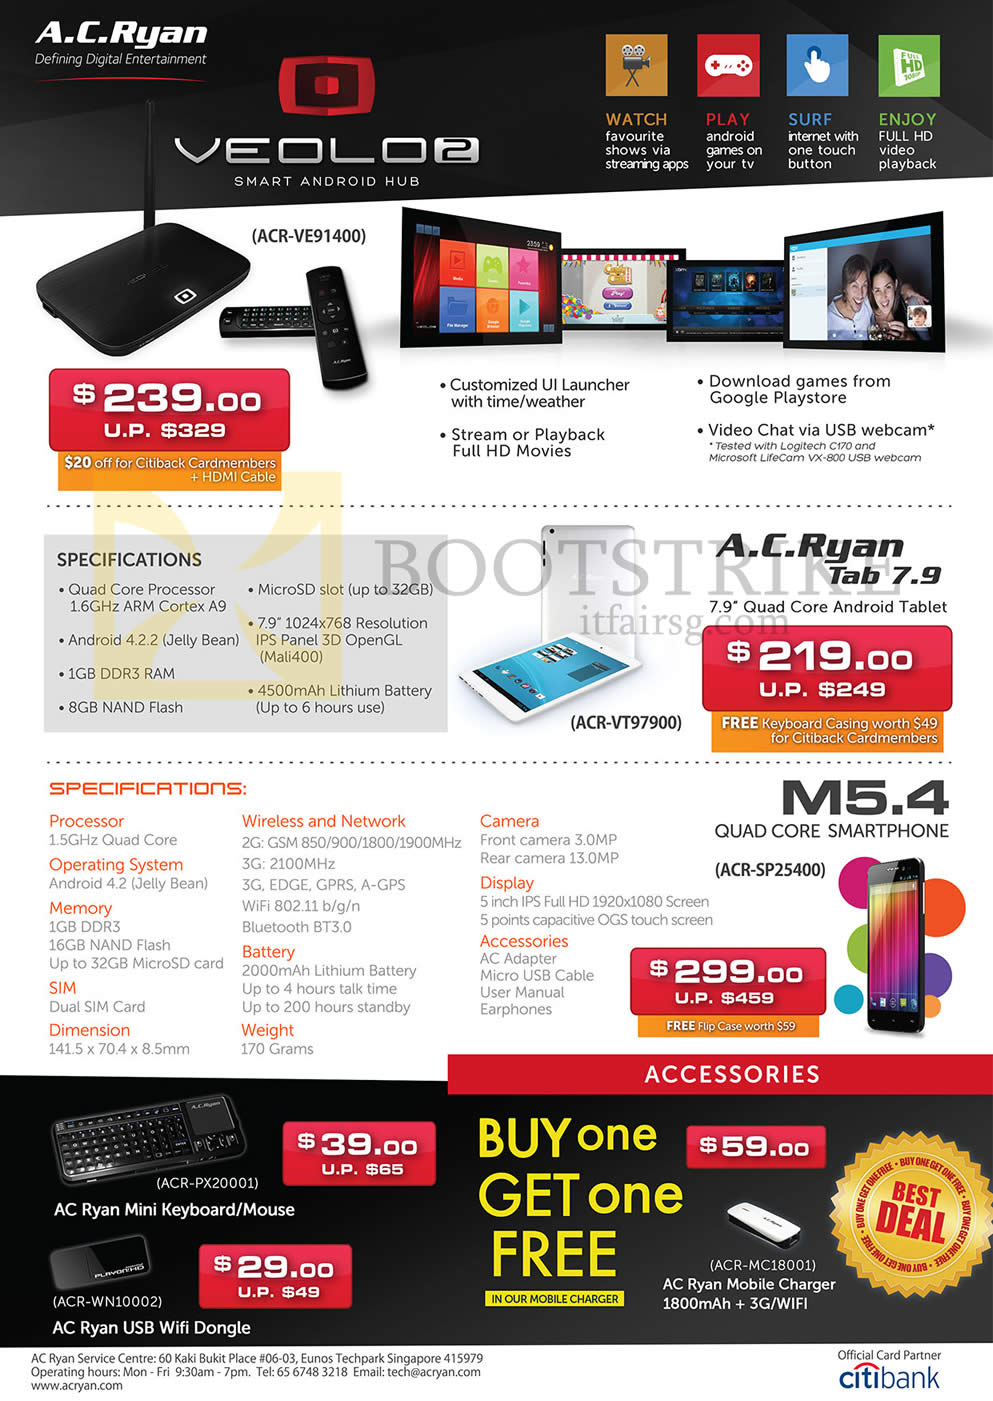 IT SHOW 2014 price list image brochure of AC Ryan Veolo2 ACR-VE91400 Android Hub, Tab 7.9 Tablet VT97900, M5.4 Smartphone SP25400, Accessories, Keyboard, Mouse